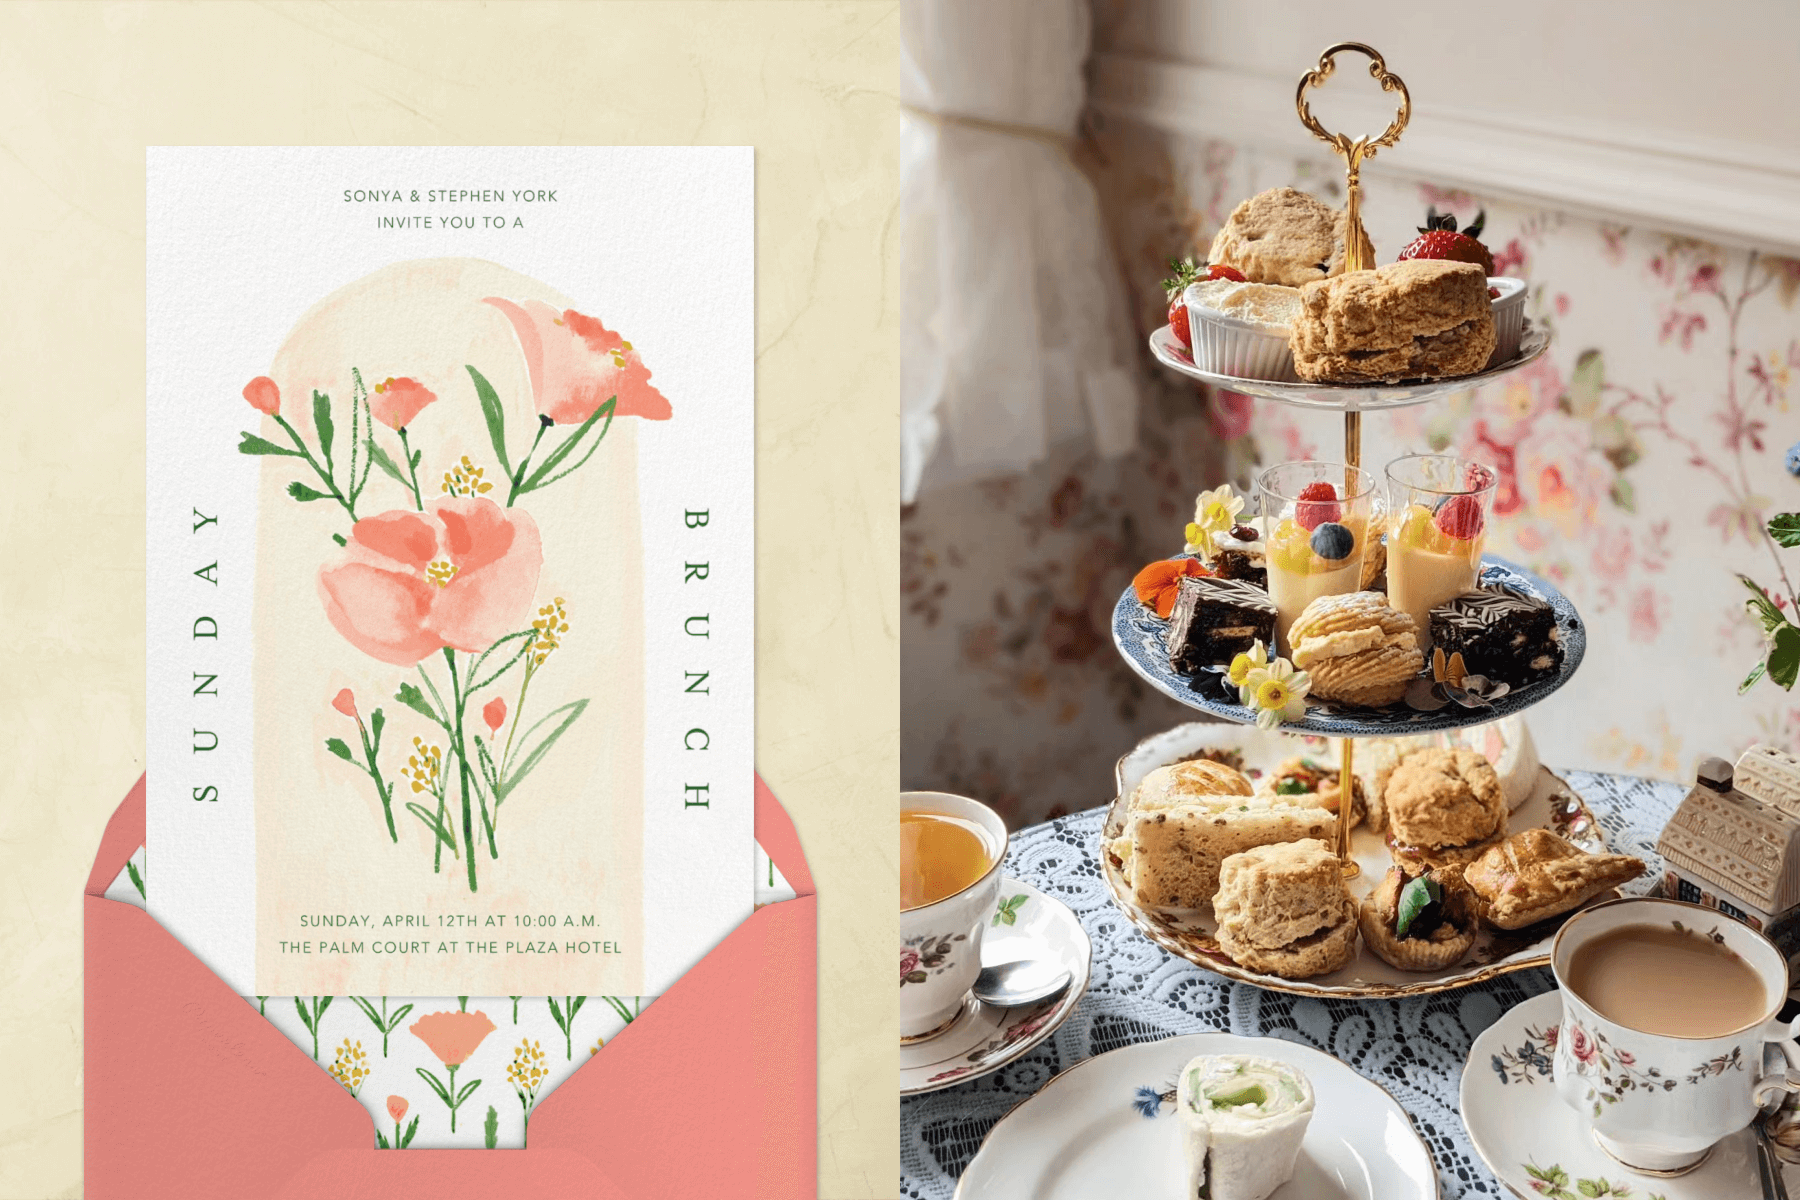 Left: A rehearsal dinner invitation with a watercolor painting of pink poppies in front of a peach arch-shape. Right: A three-tier dessert stand filled with various sweets on a table with floral cups of tea and coffee.